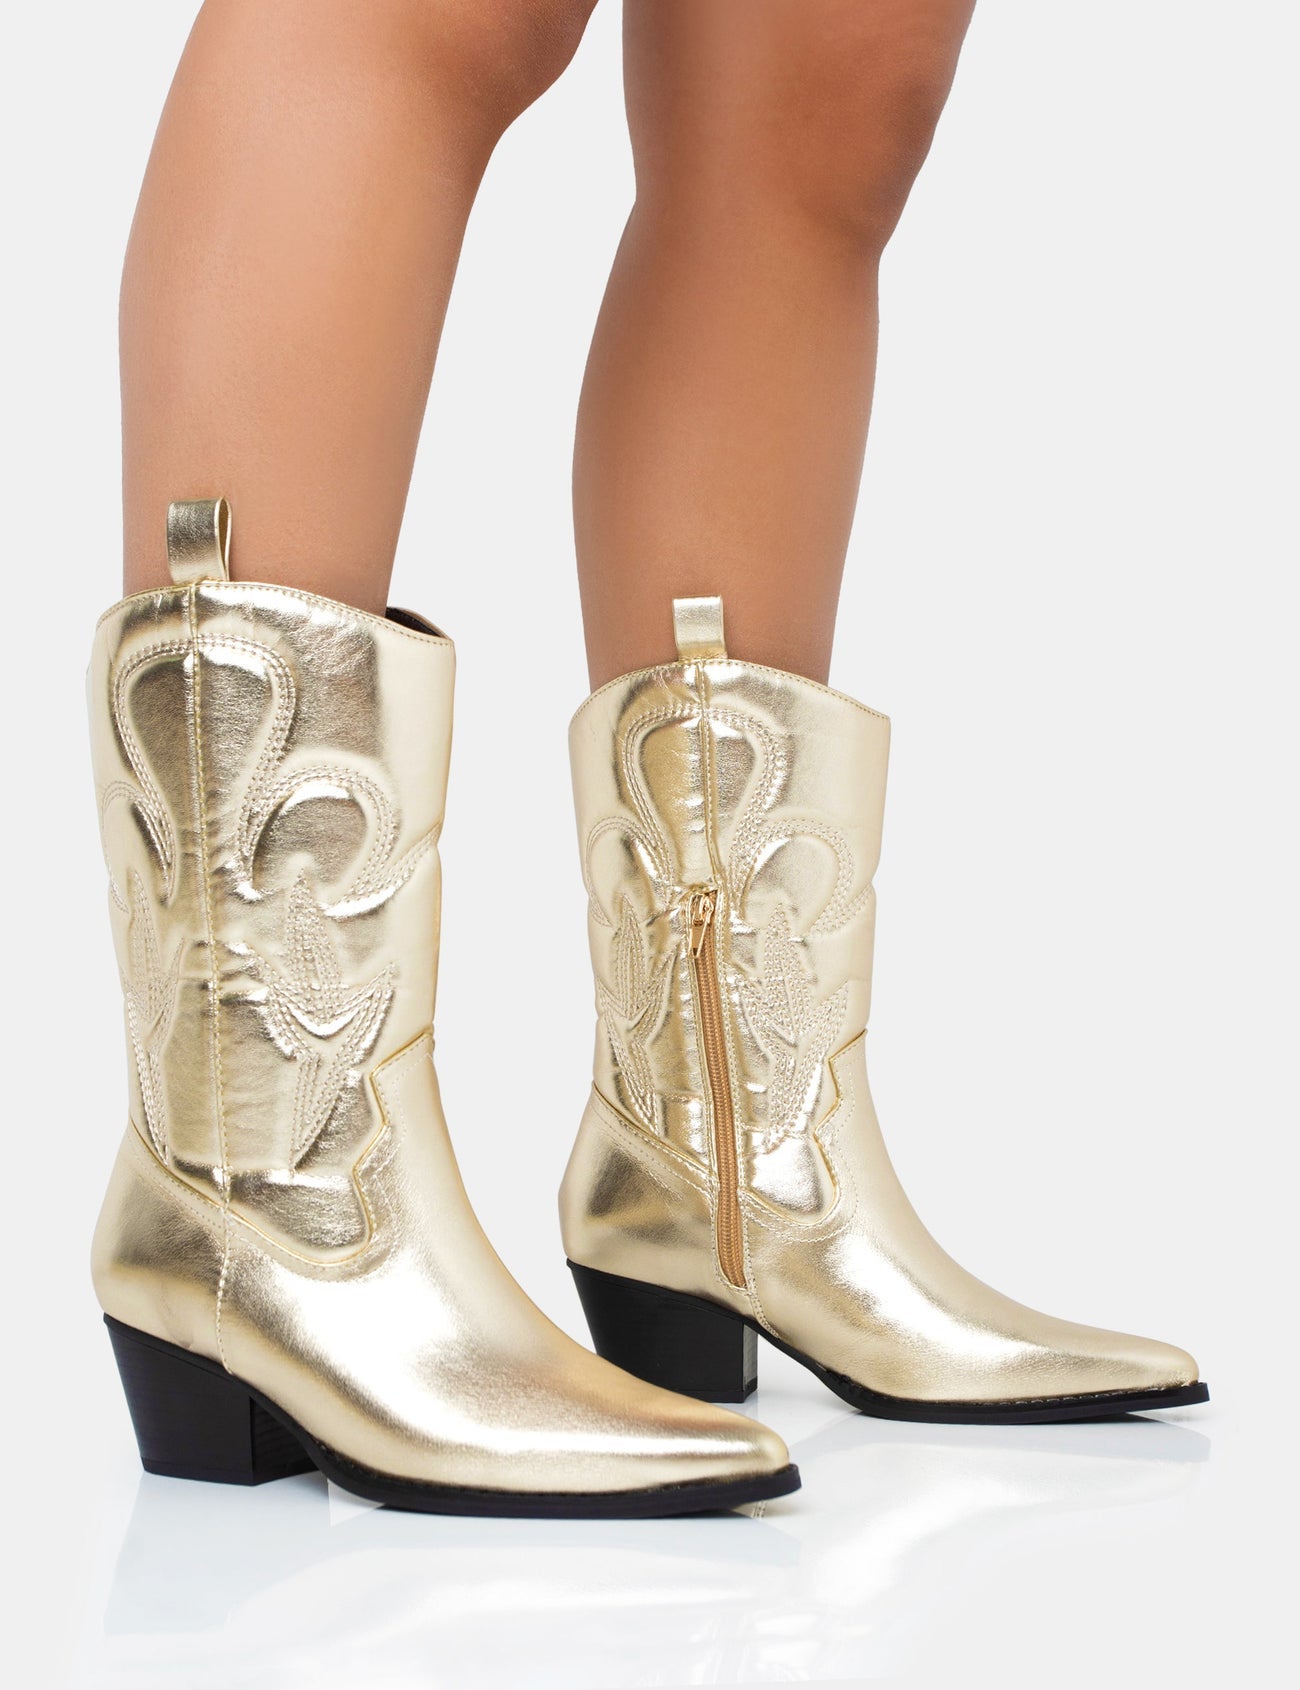 How to wear cowboy boots in 2023